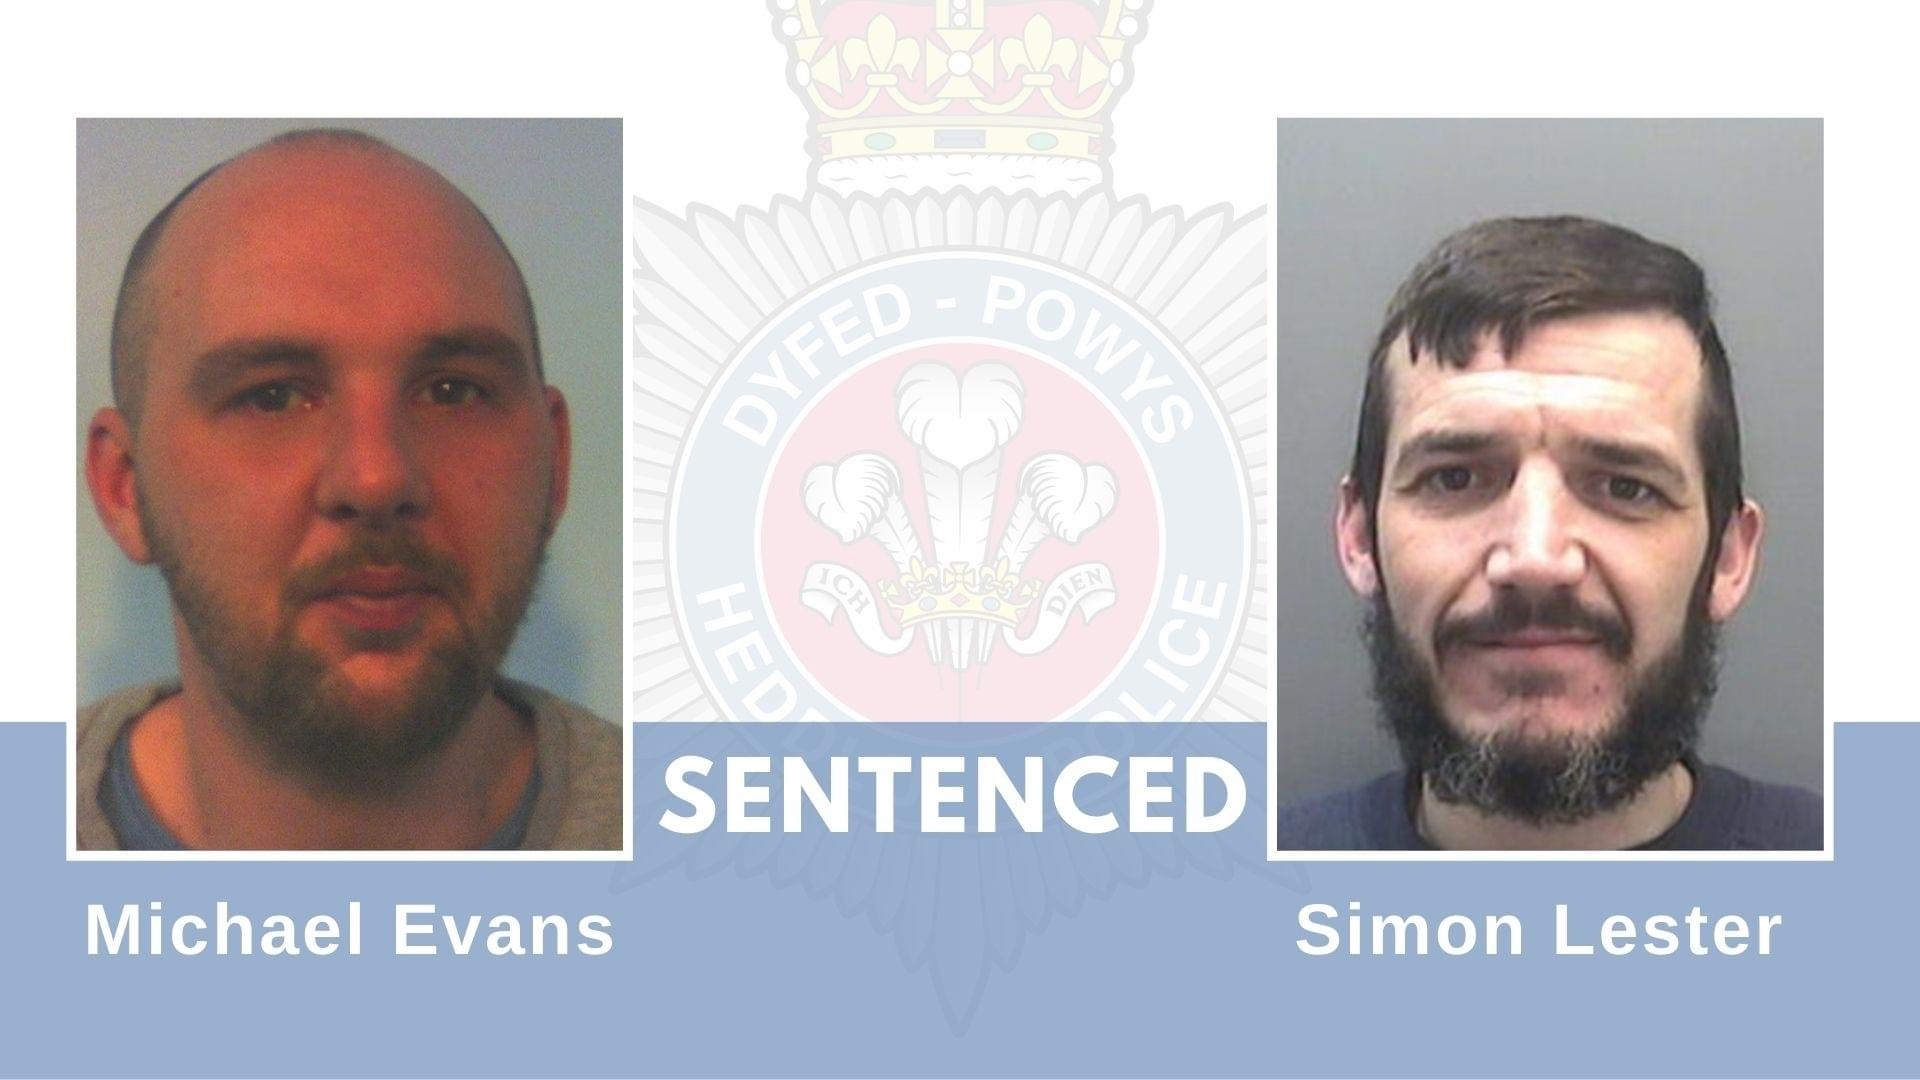 NEWS | Two men have been sentenced for rural burglaries and vehicle thefts